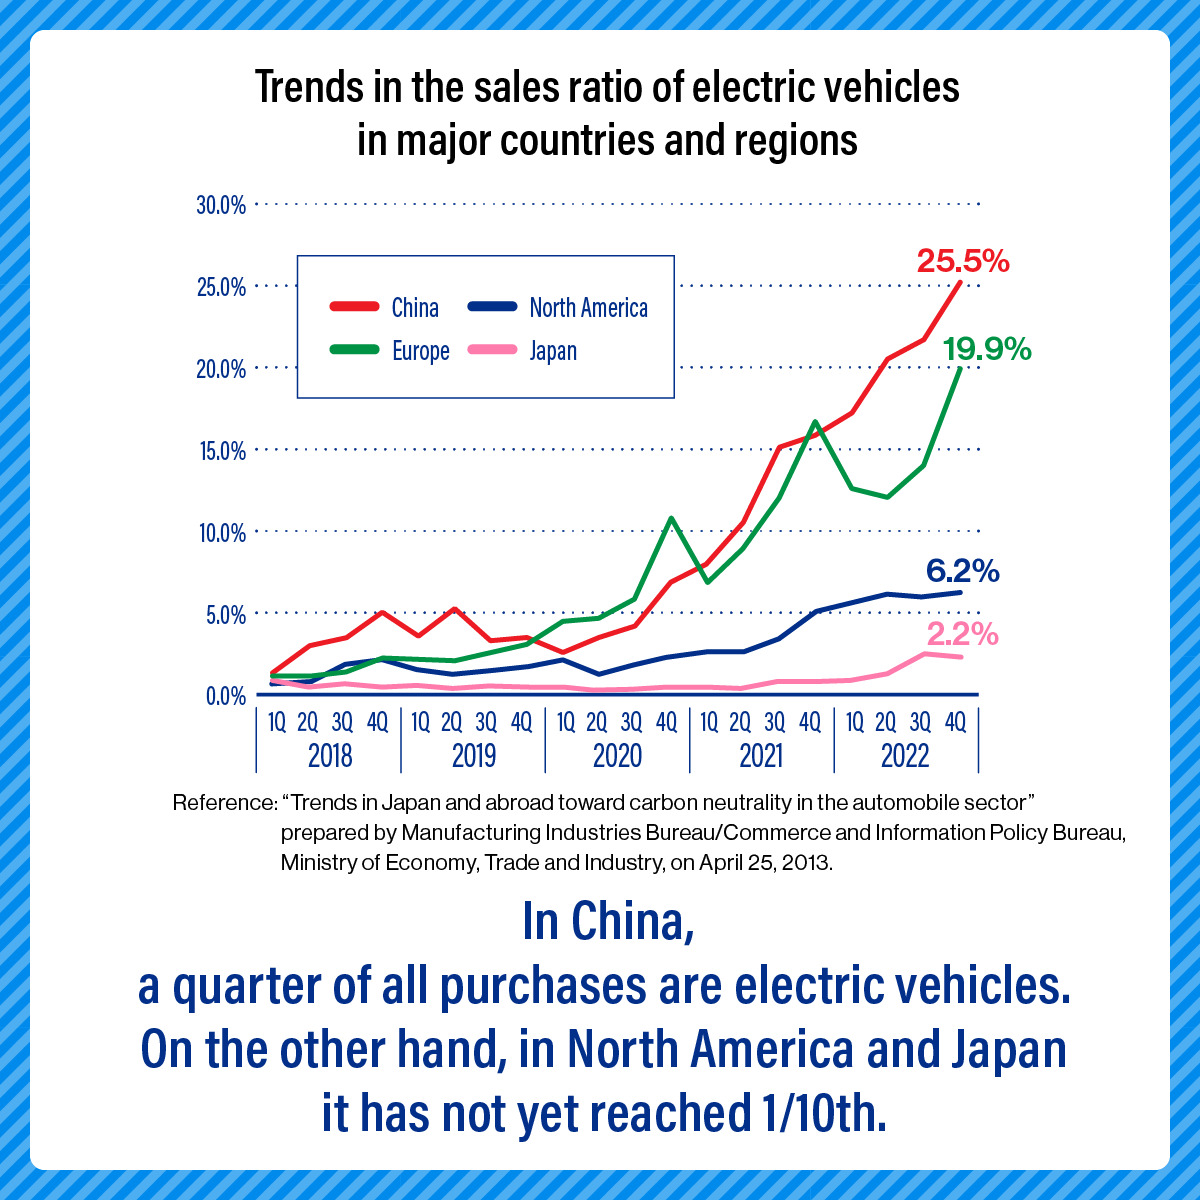 Trends in the sales ratio of electric vehicles in major countries and regions